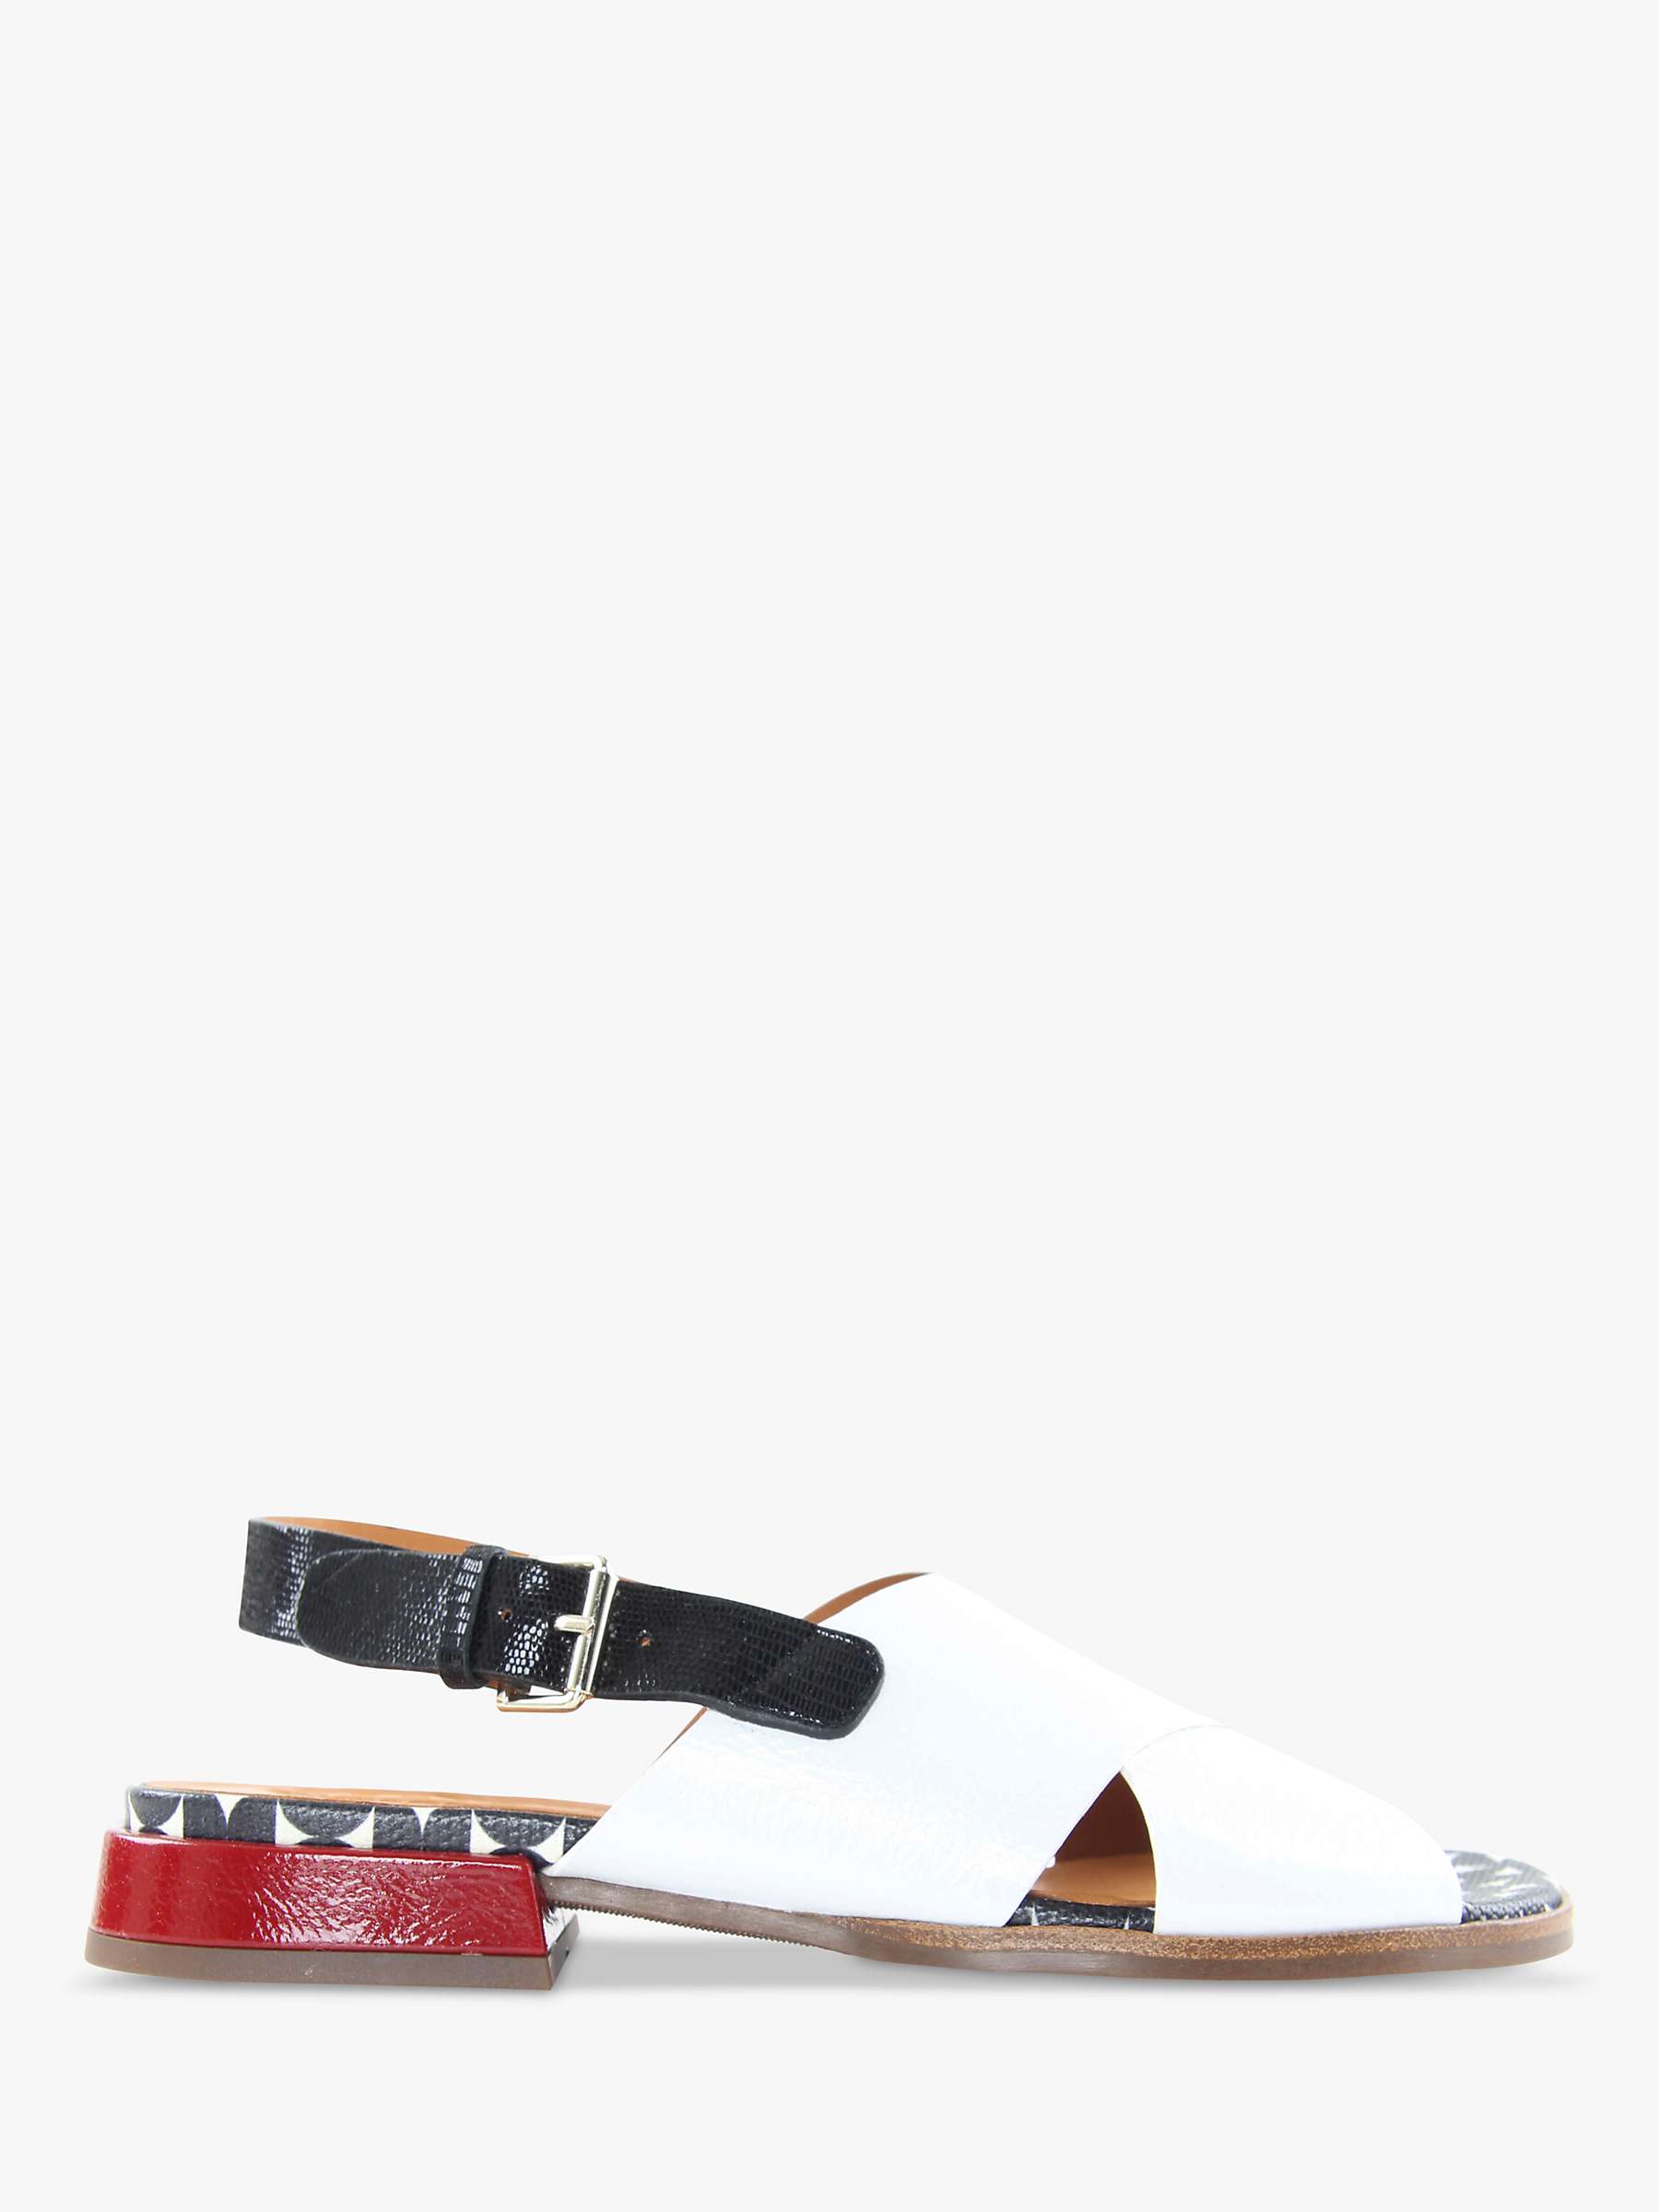 Buy Chie Mihara Wanter Leather Sandals, White/Black/Red Online at johnlewis.com